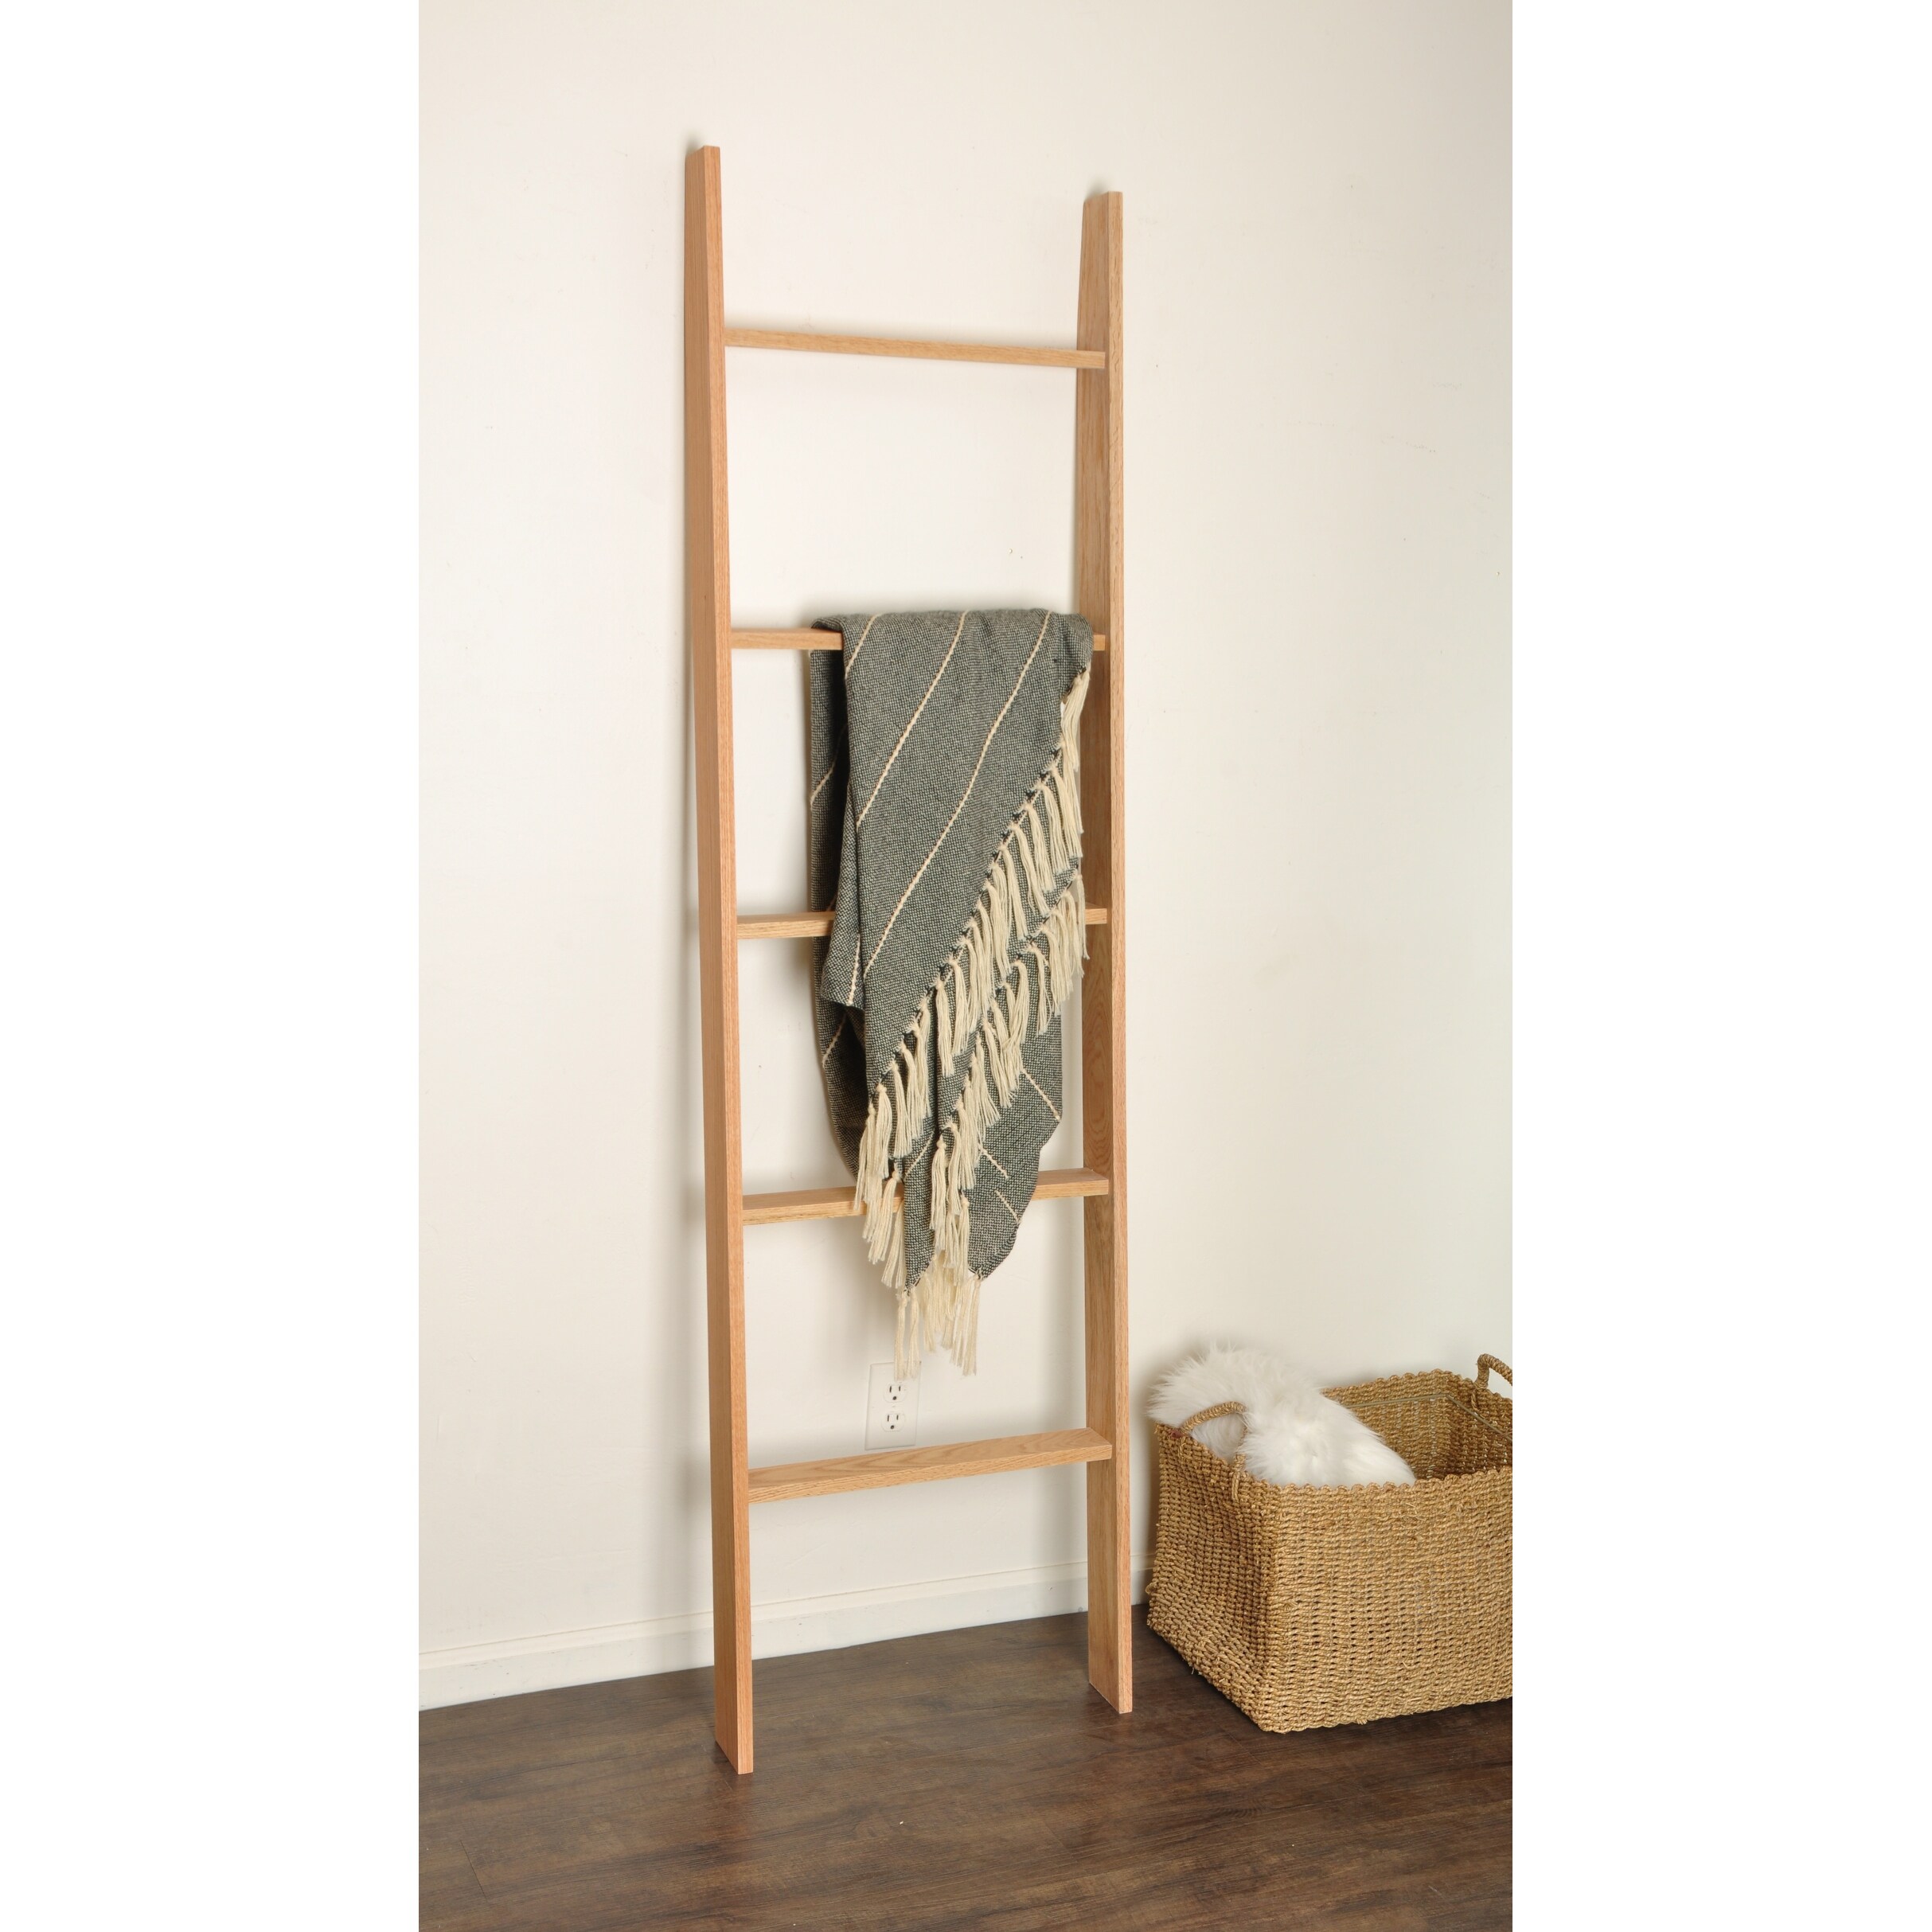 Country Timber Quilt Hanger Up to 72 Compression Clamp | Wall Mounted Hanging Rack for Blankets, Rugs & Quilts | Premium Solid Oak Wood Stain 